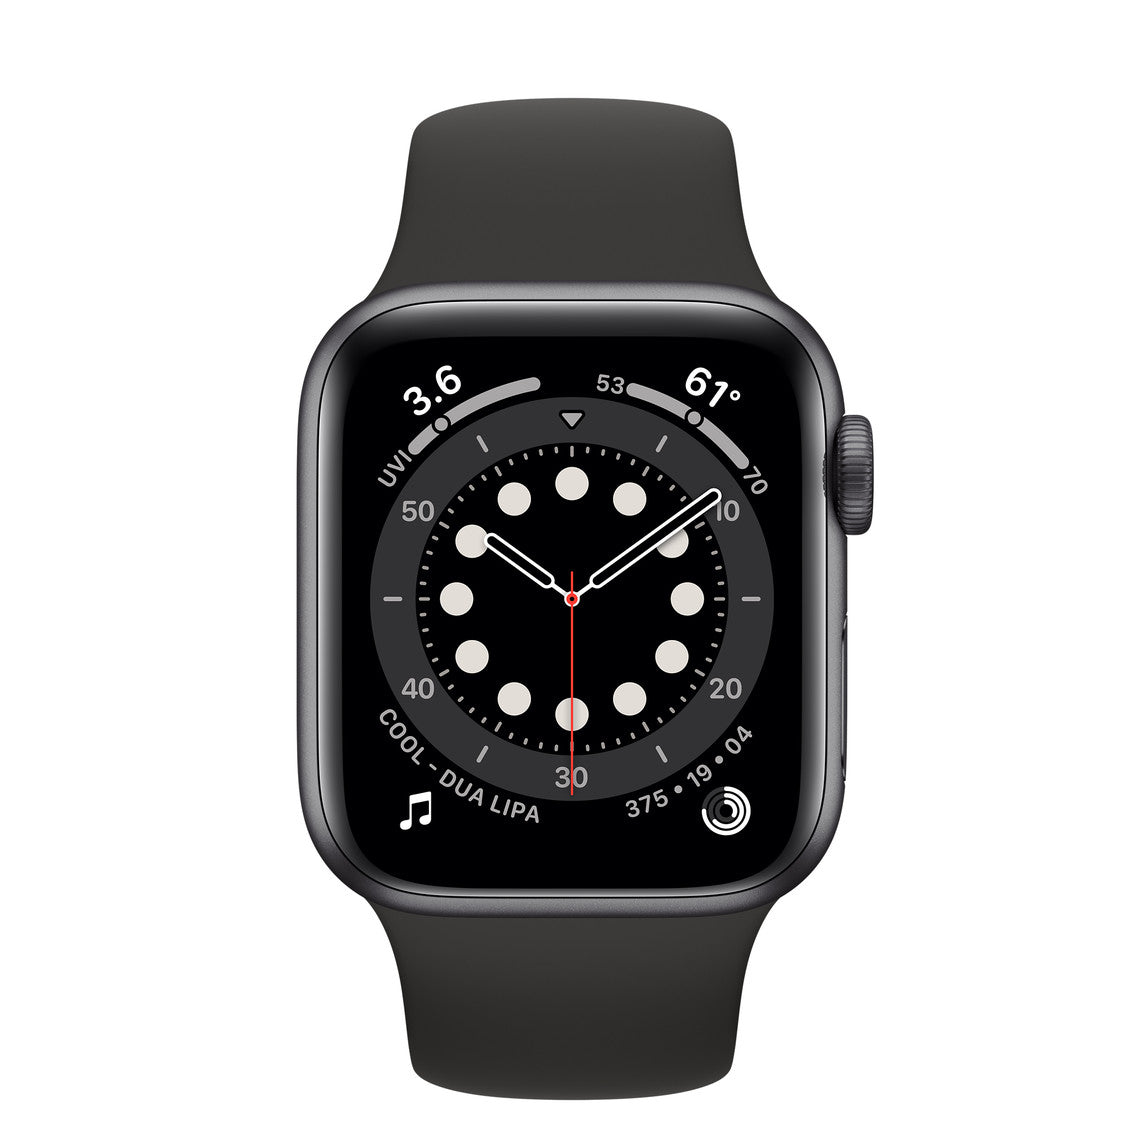 Smart Watch Series 6 | Logo Watch | Infinite Display | All Working | Compatible with Apple iPhone & Android devices